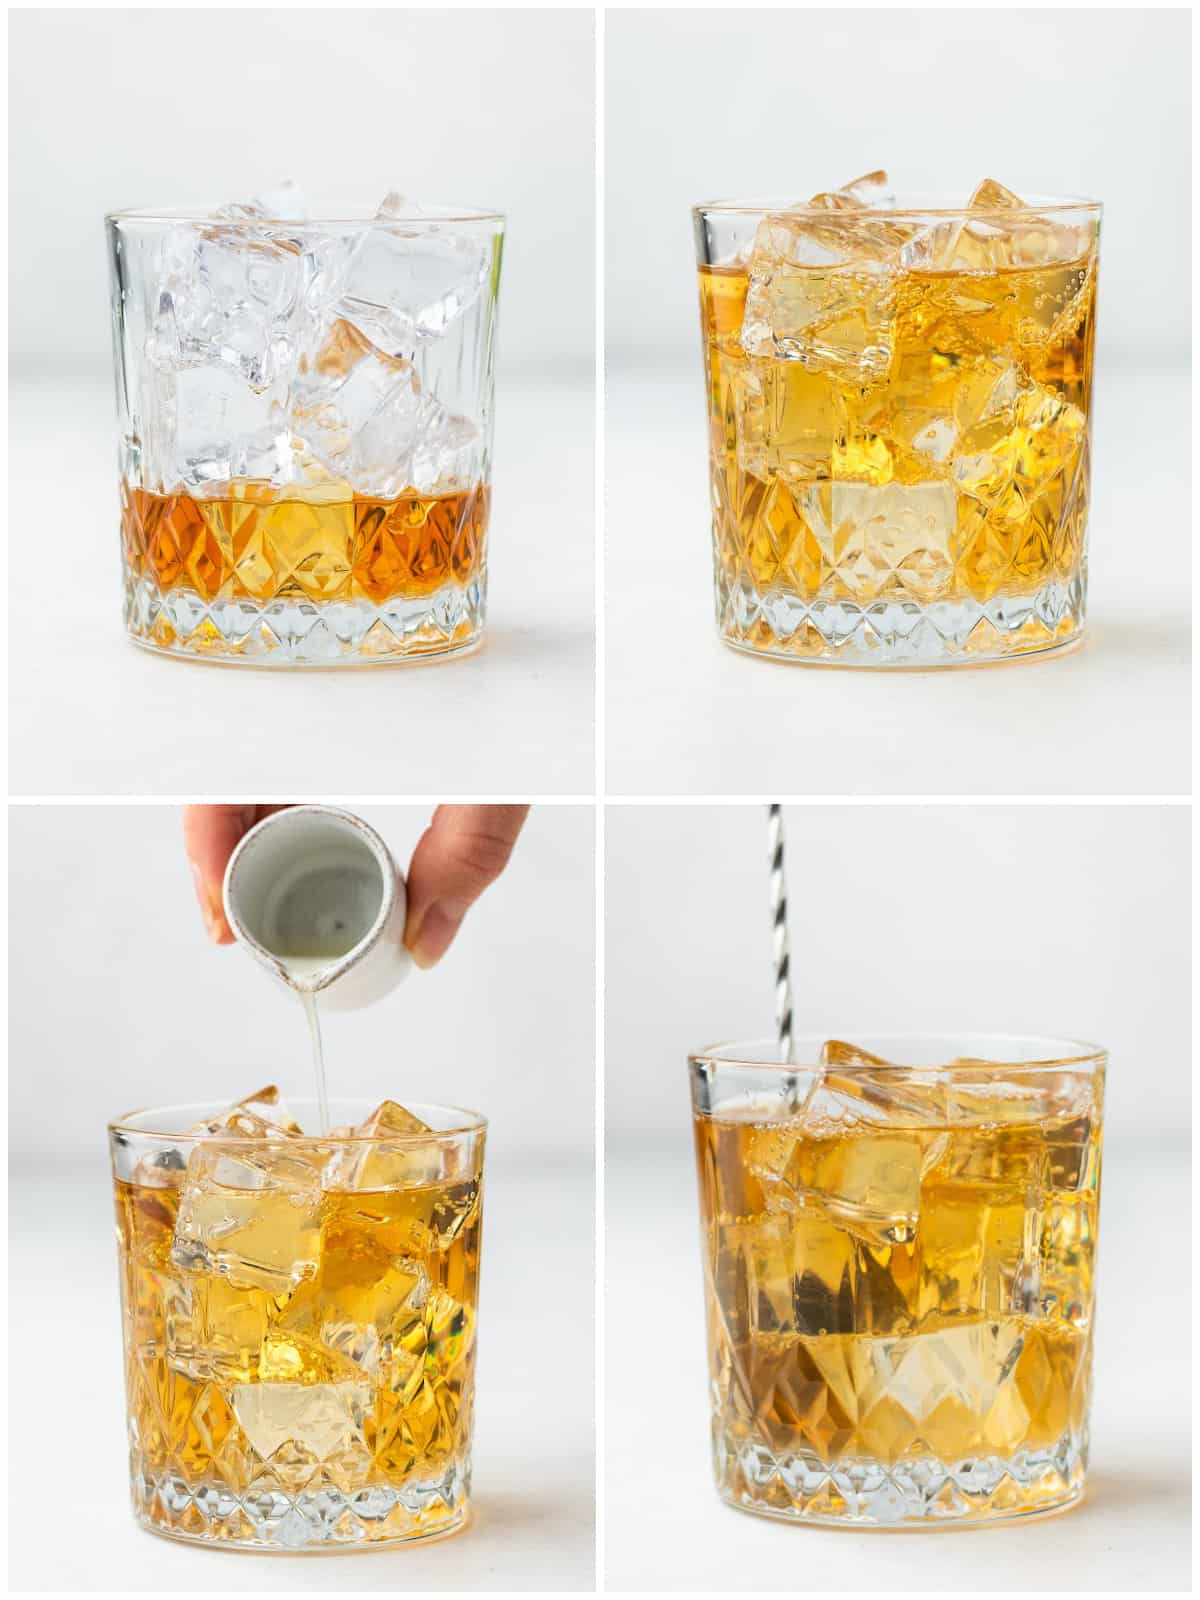 Step by step photos on how to make a Whiskey Ginger.